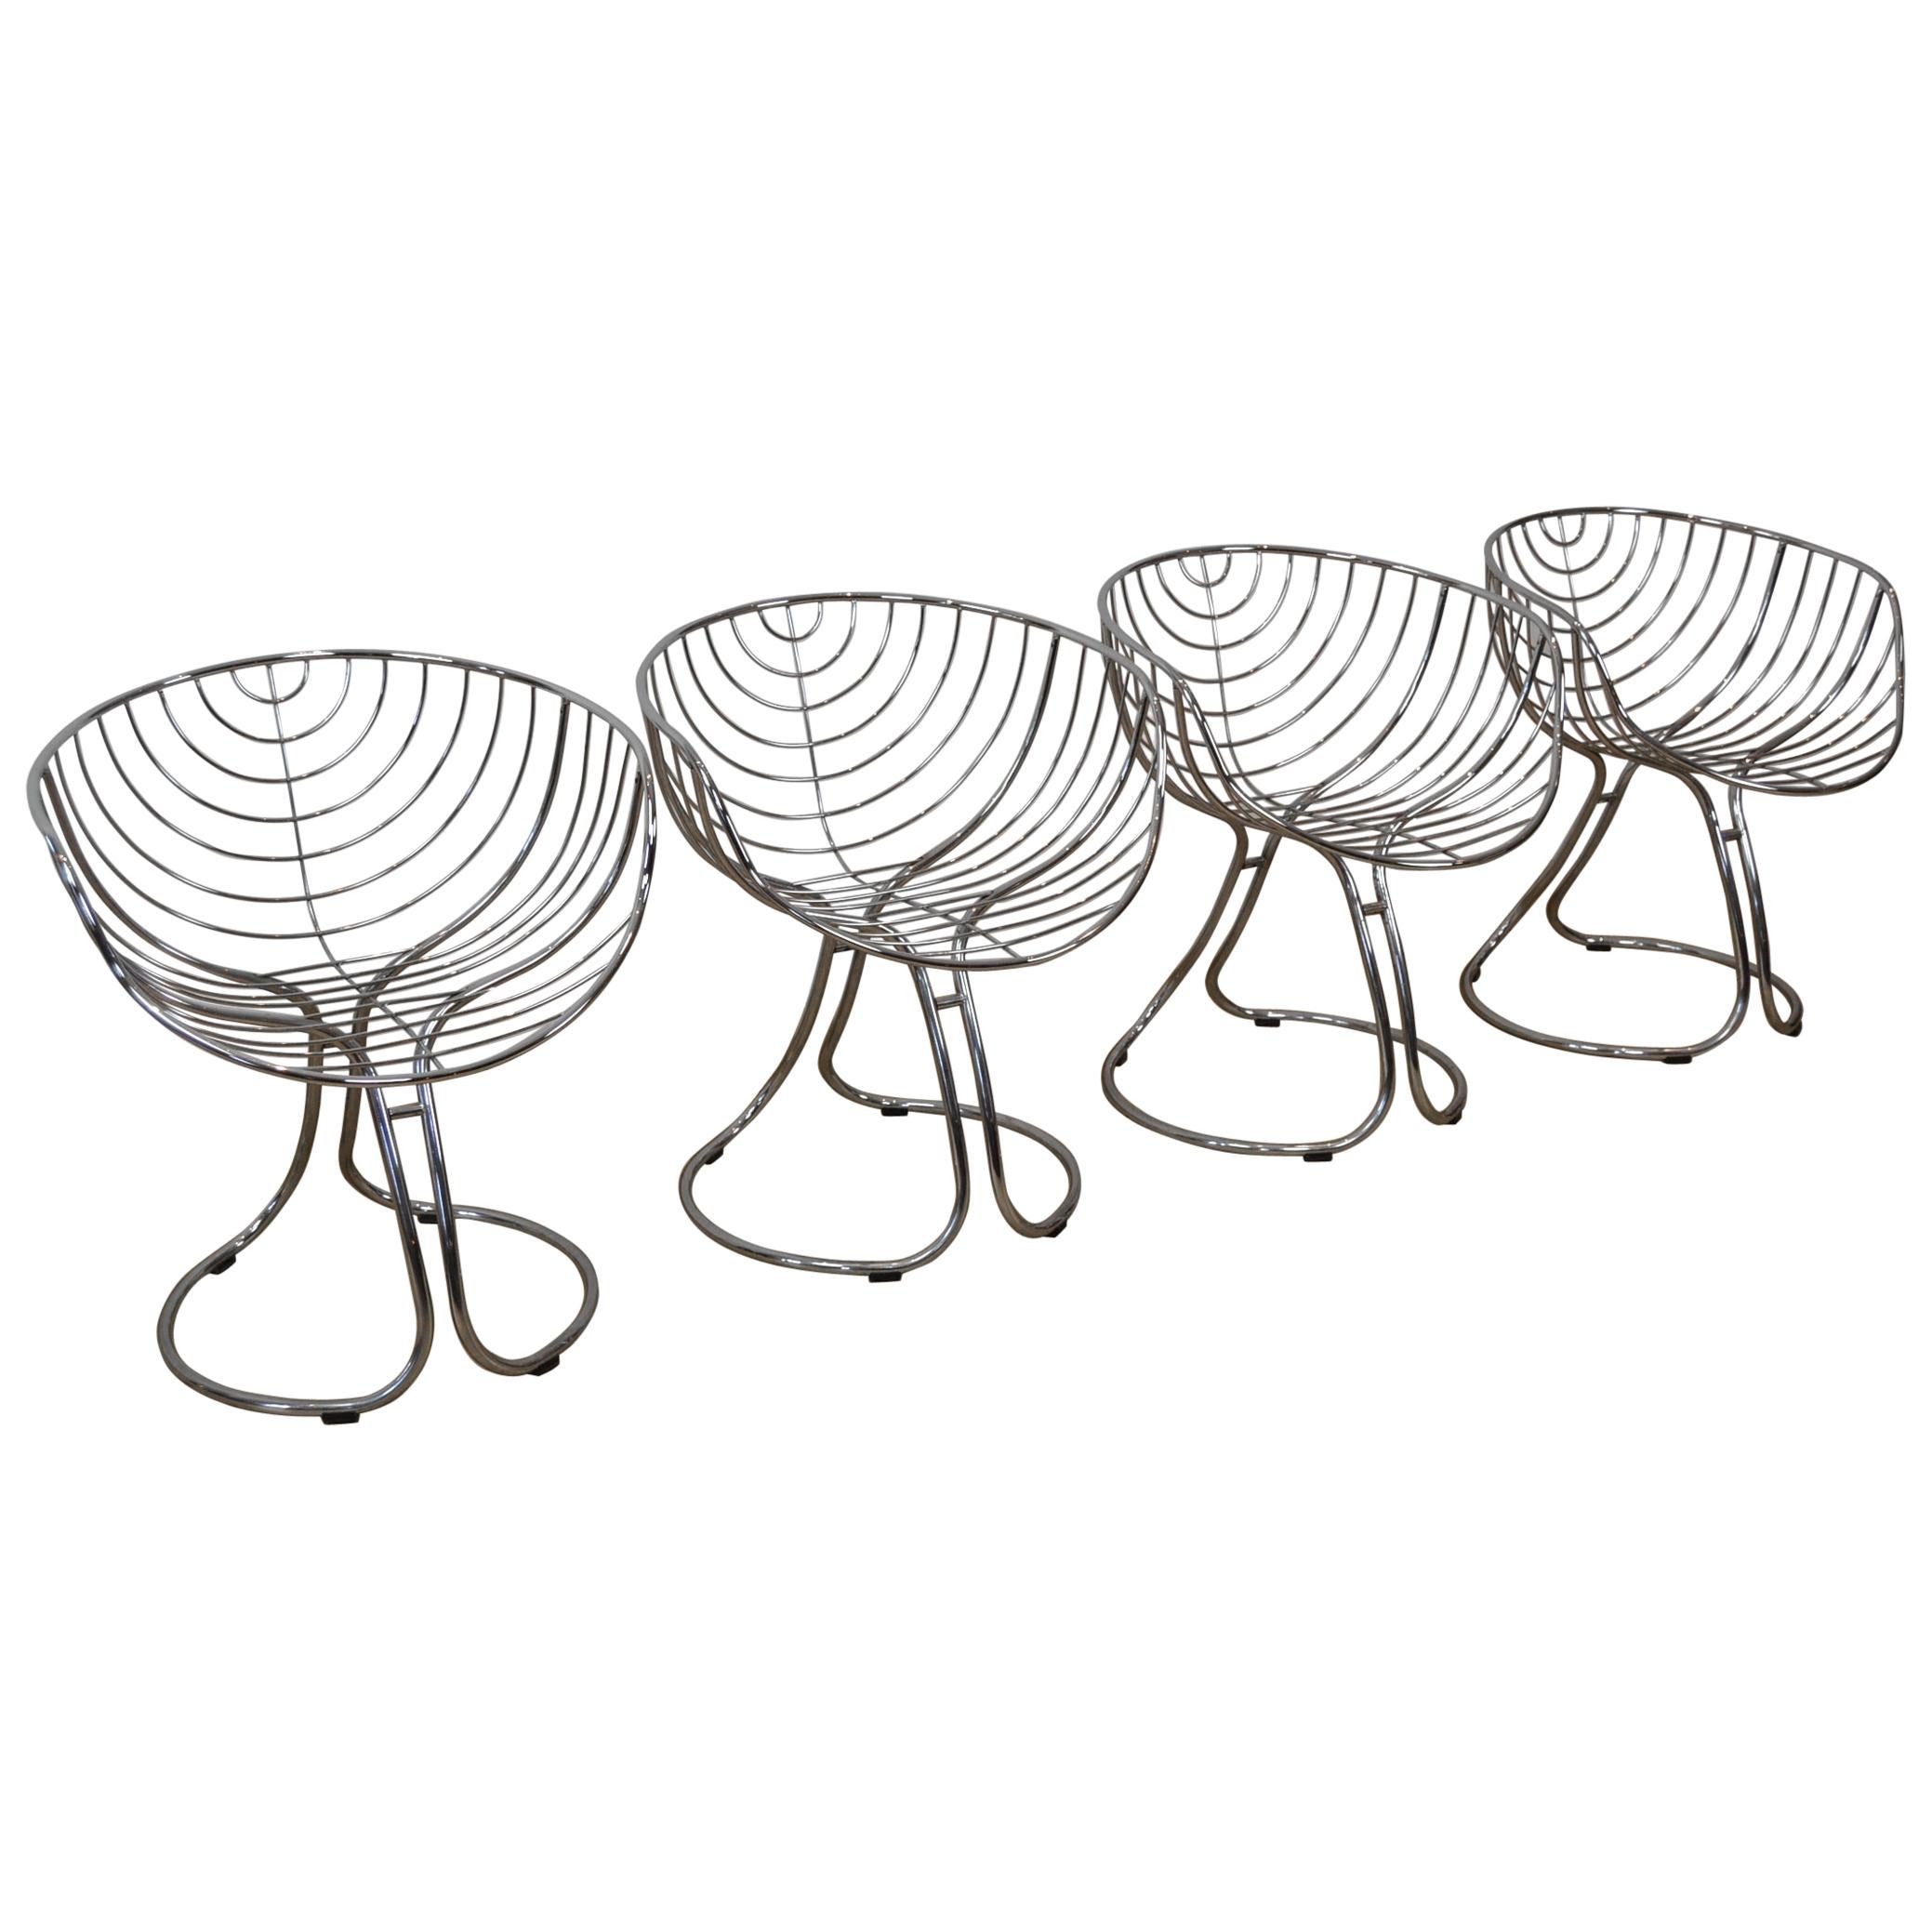 Set of 4 Pan Am Armchairs, Chrome Chairs, 1960s